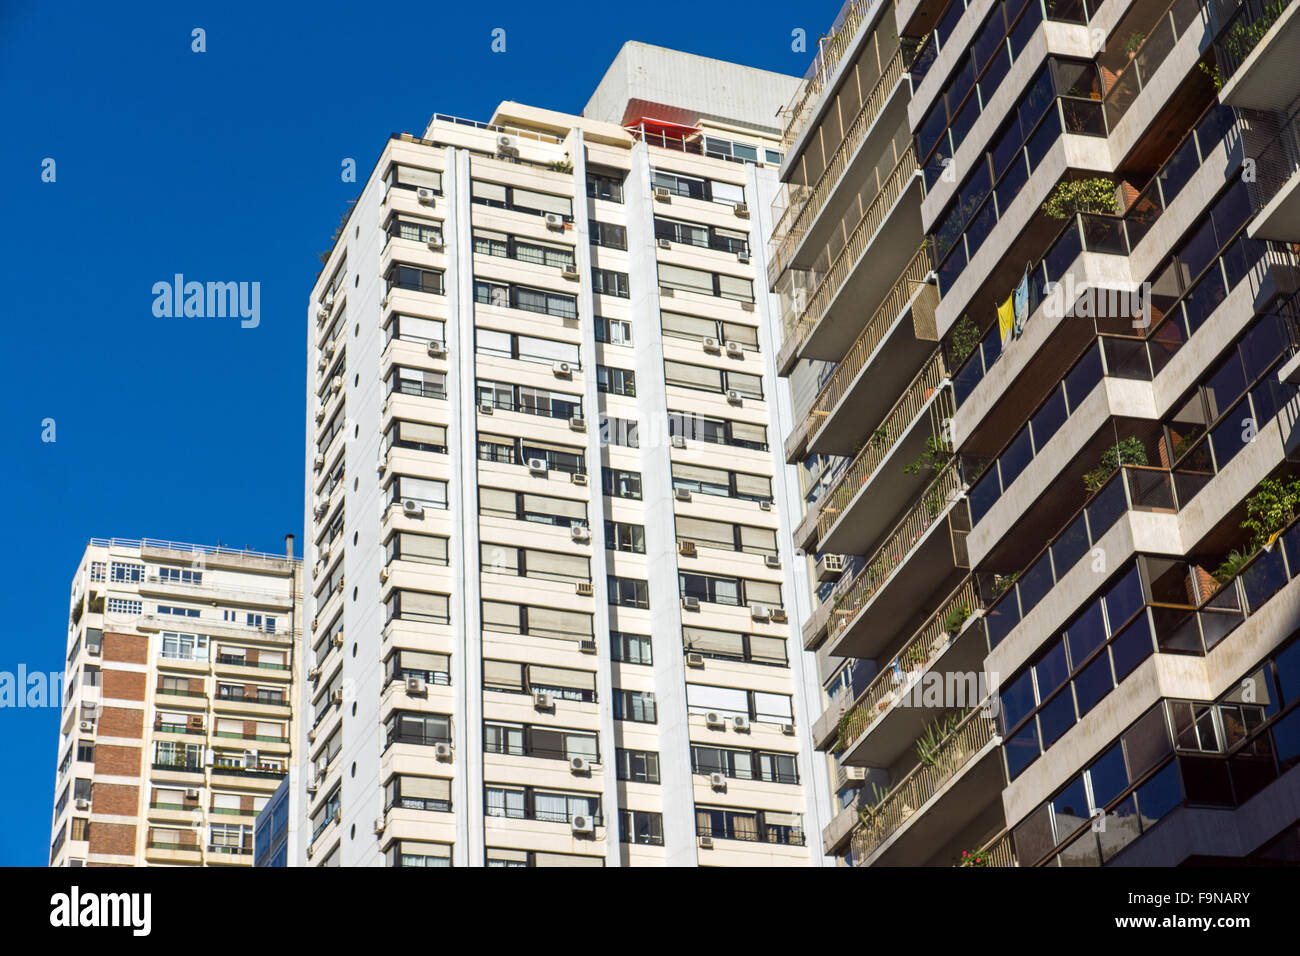 Typical hirise buildings in Buenos Aires, Argentina Stock Photo